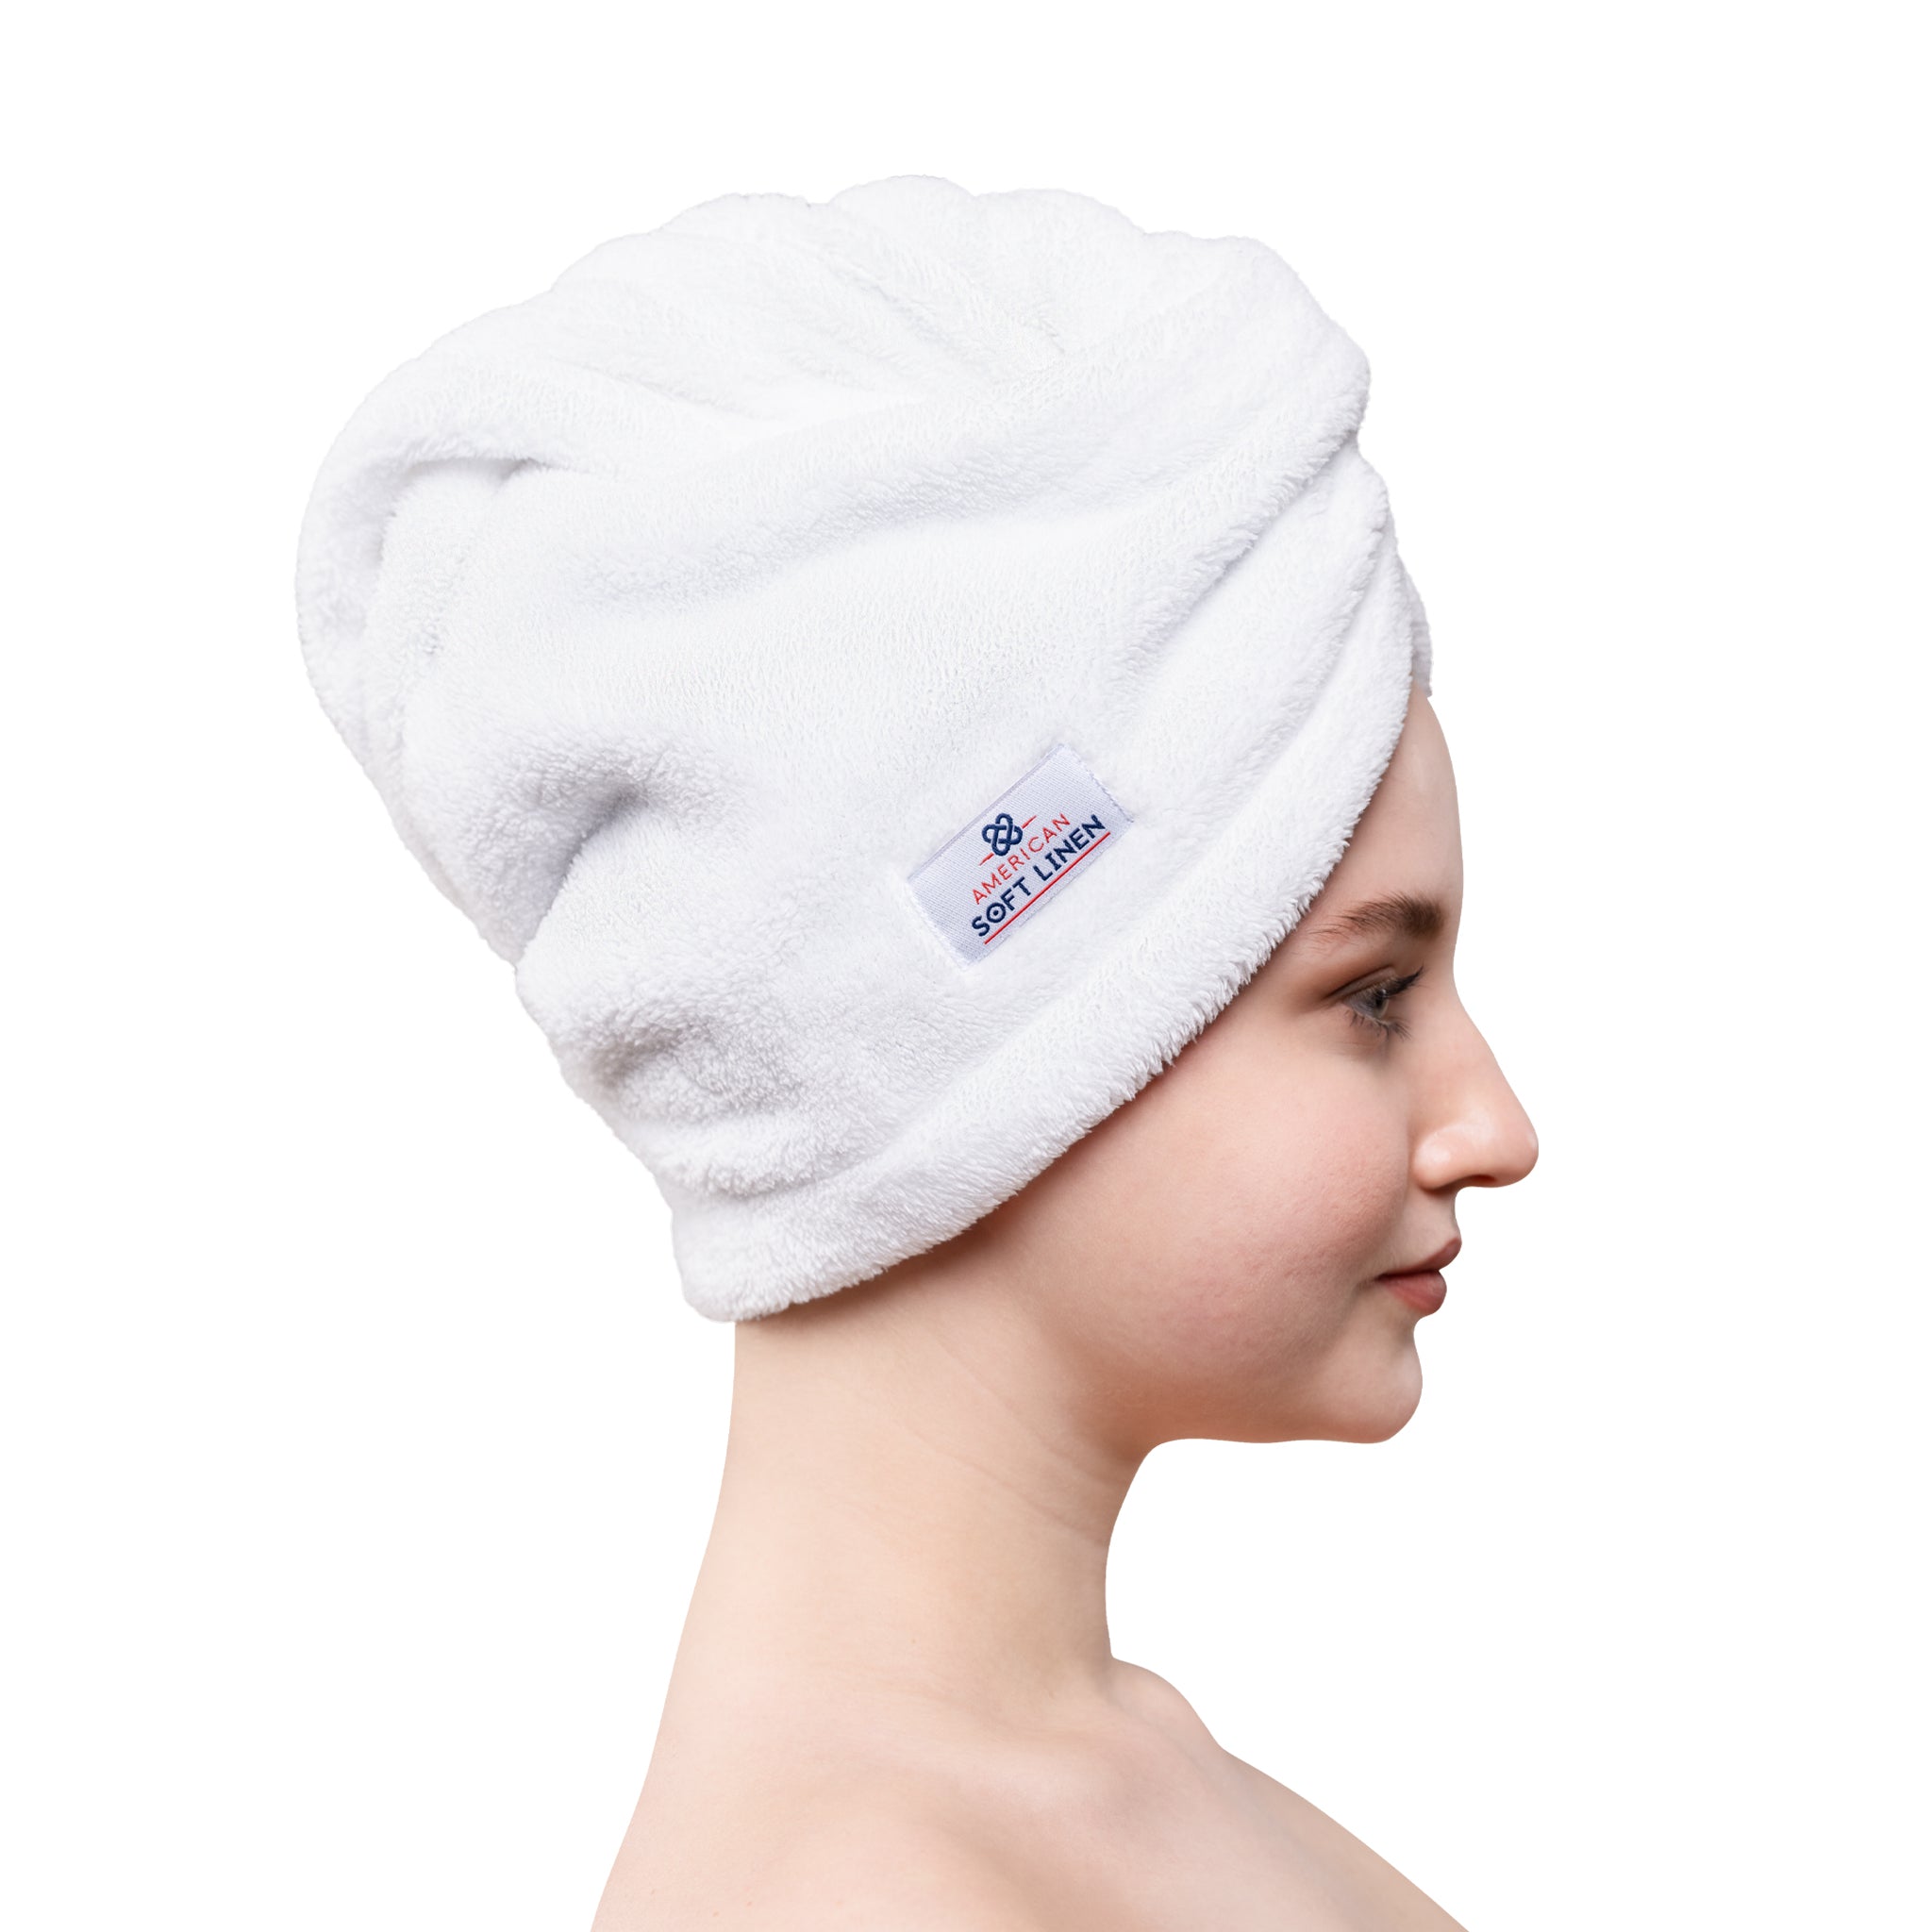 American Soft Linen Extremely Soft Super Absorbent and Fast Drying Hair Towel -2-packed-white-2